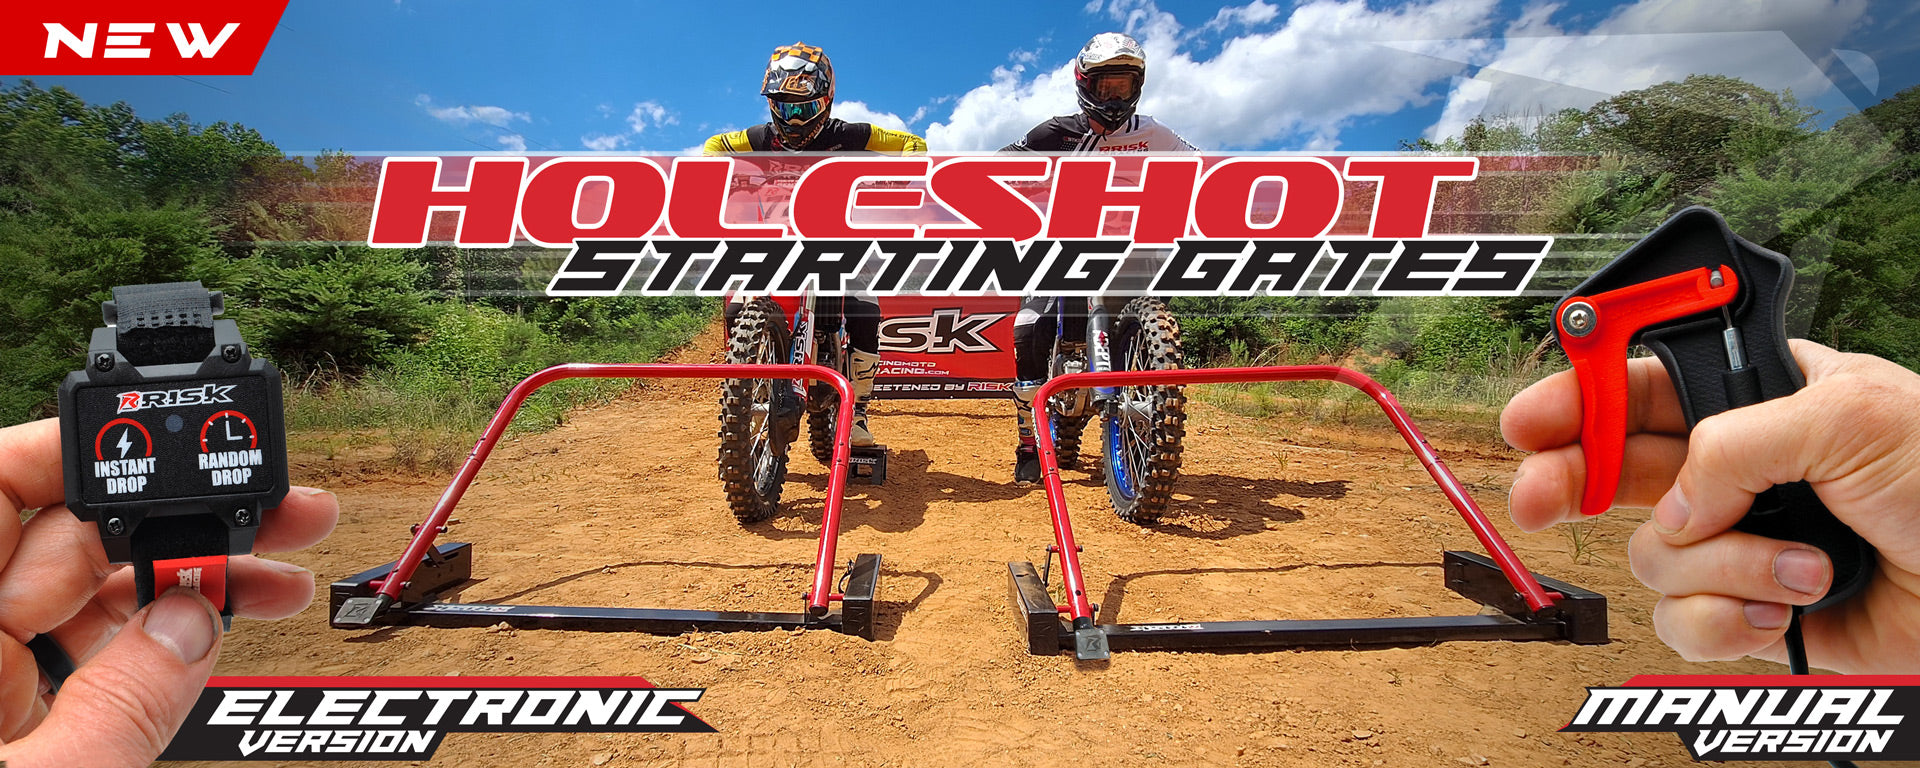 Holeshot Starting Gates Homepage Banner featuring both the electronic and manual gates